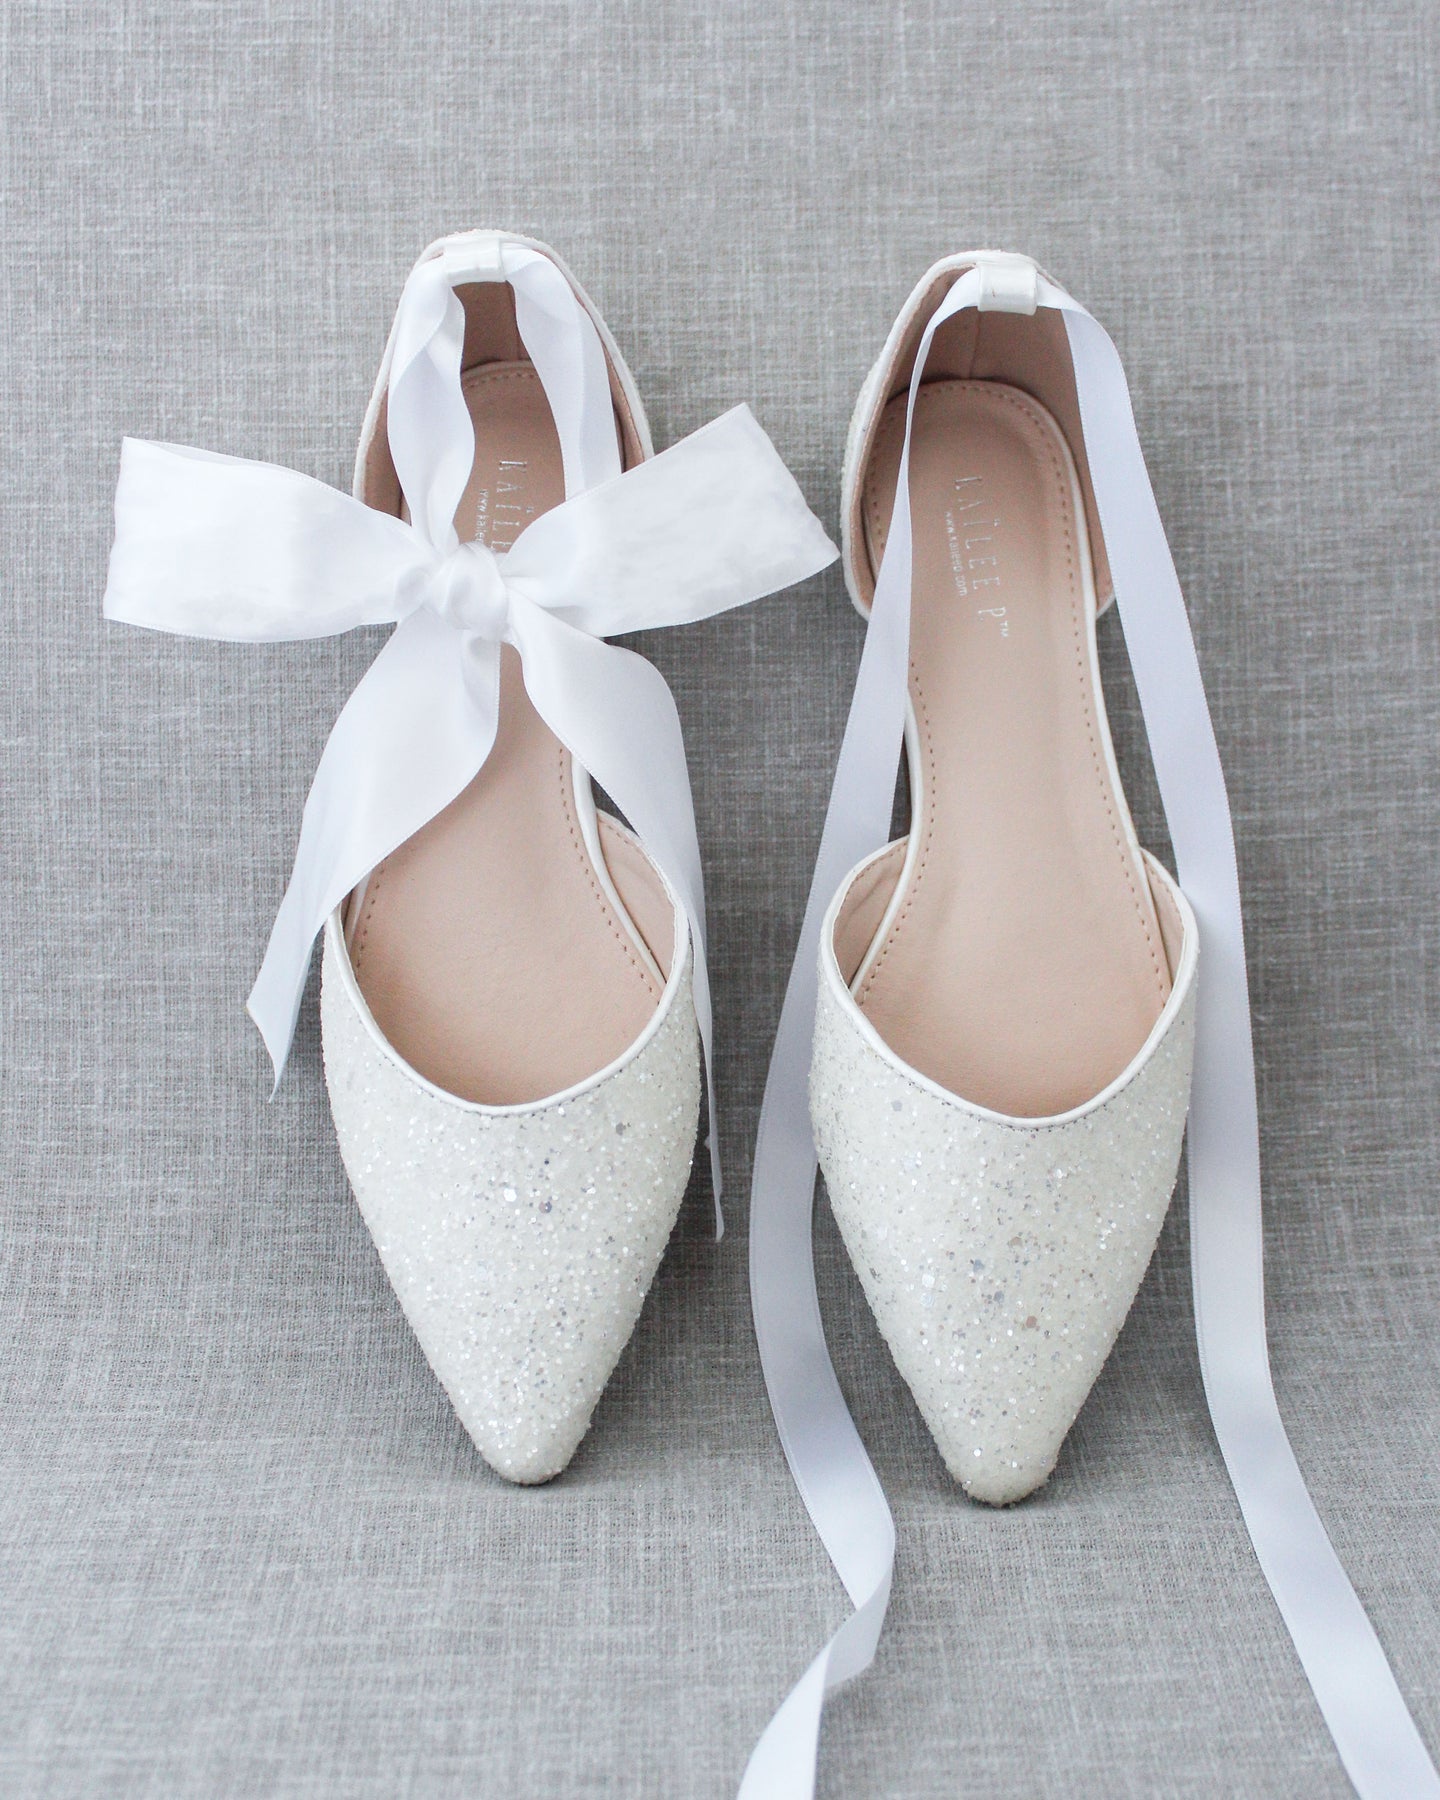 White Rock Glitter Pointy Toe Flats with Satin Ankle Tie or Ballerina ...